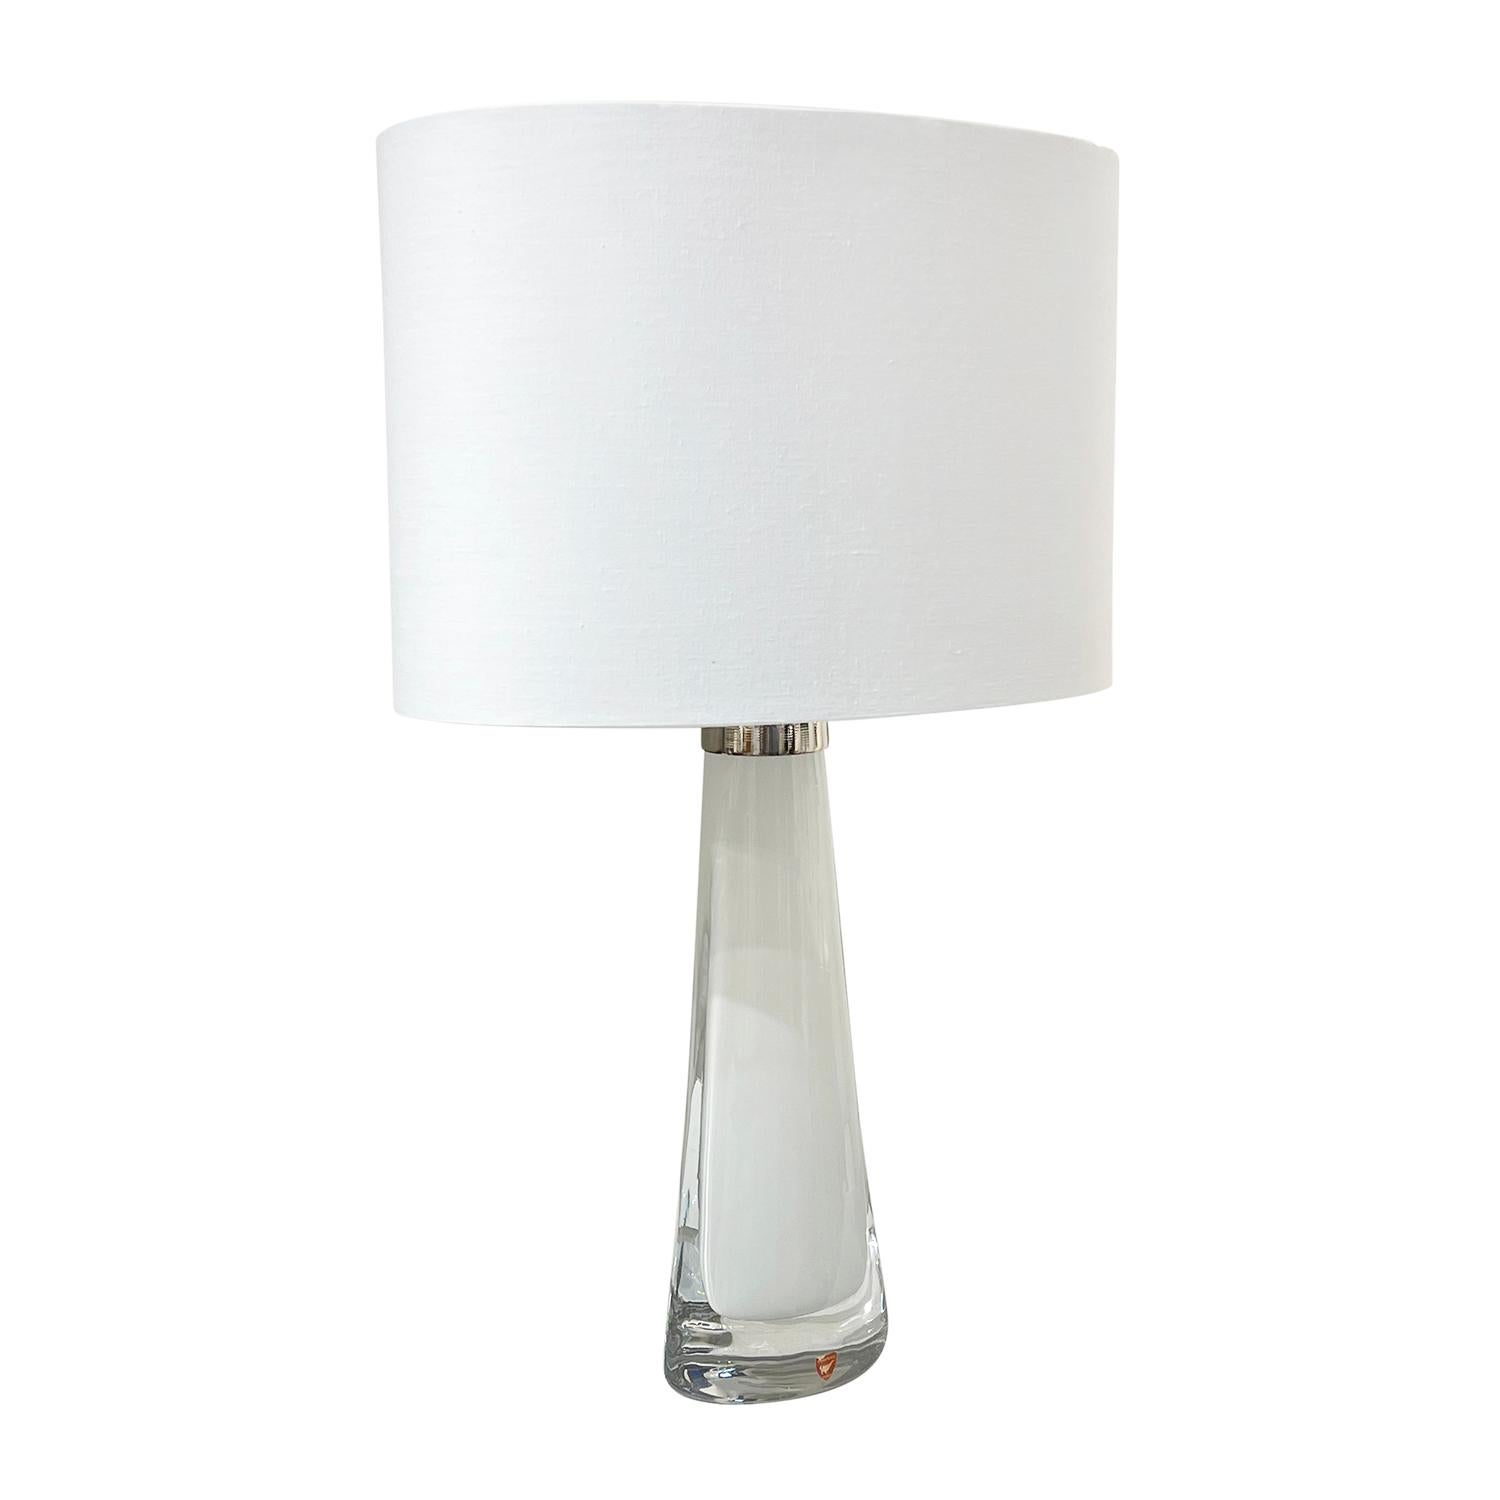 A half round, vintage Mid-Century Modern Swedish table lamp with a new white oval shade, made of hand blown Orrefors glass, the beam is enhanced with a chrome ring, featuring a one light socket in good condition. The white undercoat Scandinavian